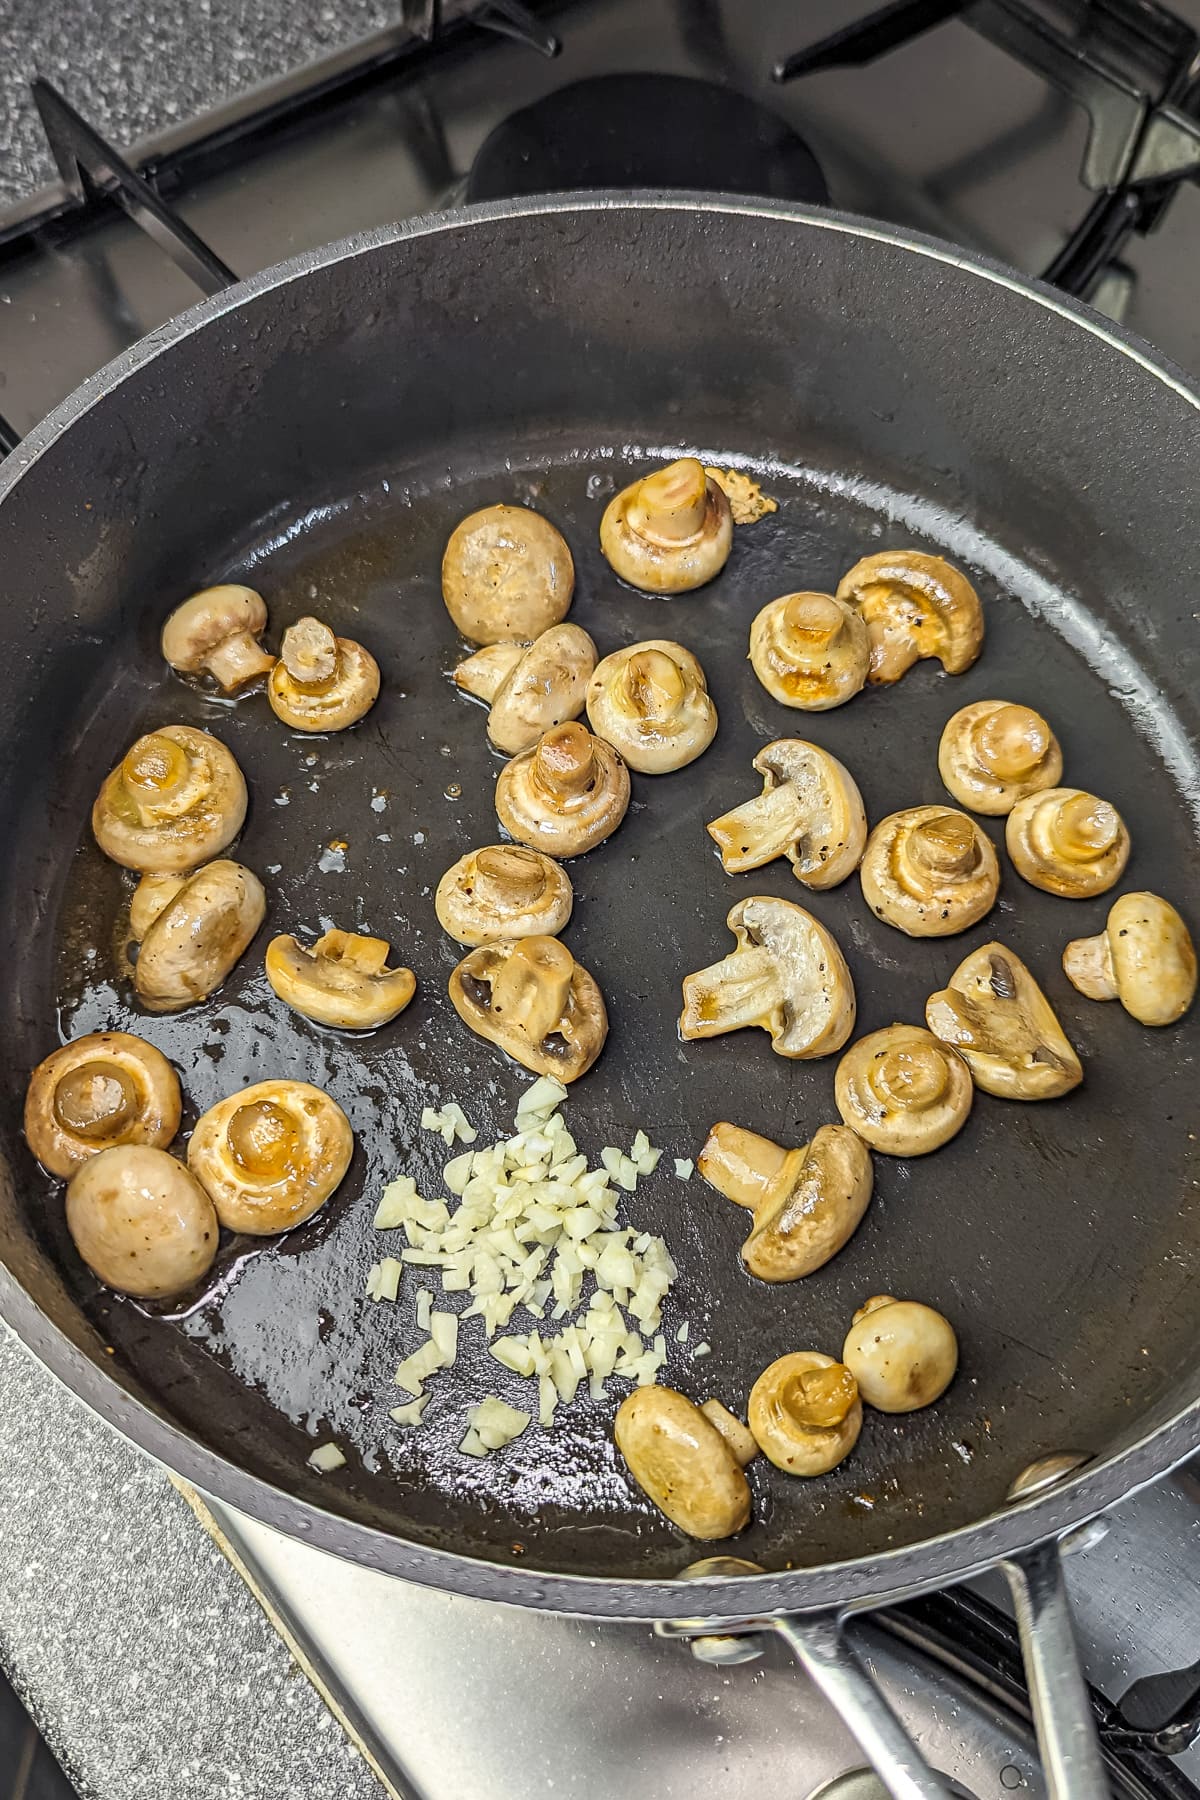 Fresh whole mushrooms being sautéed in a pan with chopped garlic, preparation for a chicken mushroom dish.